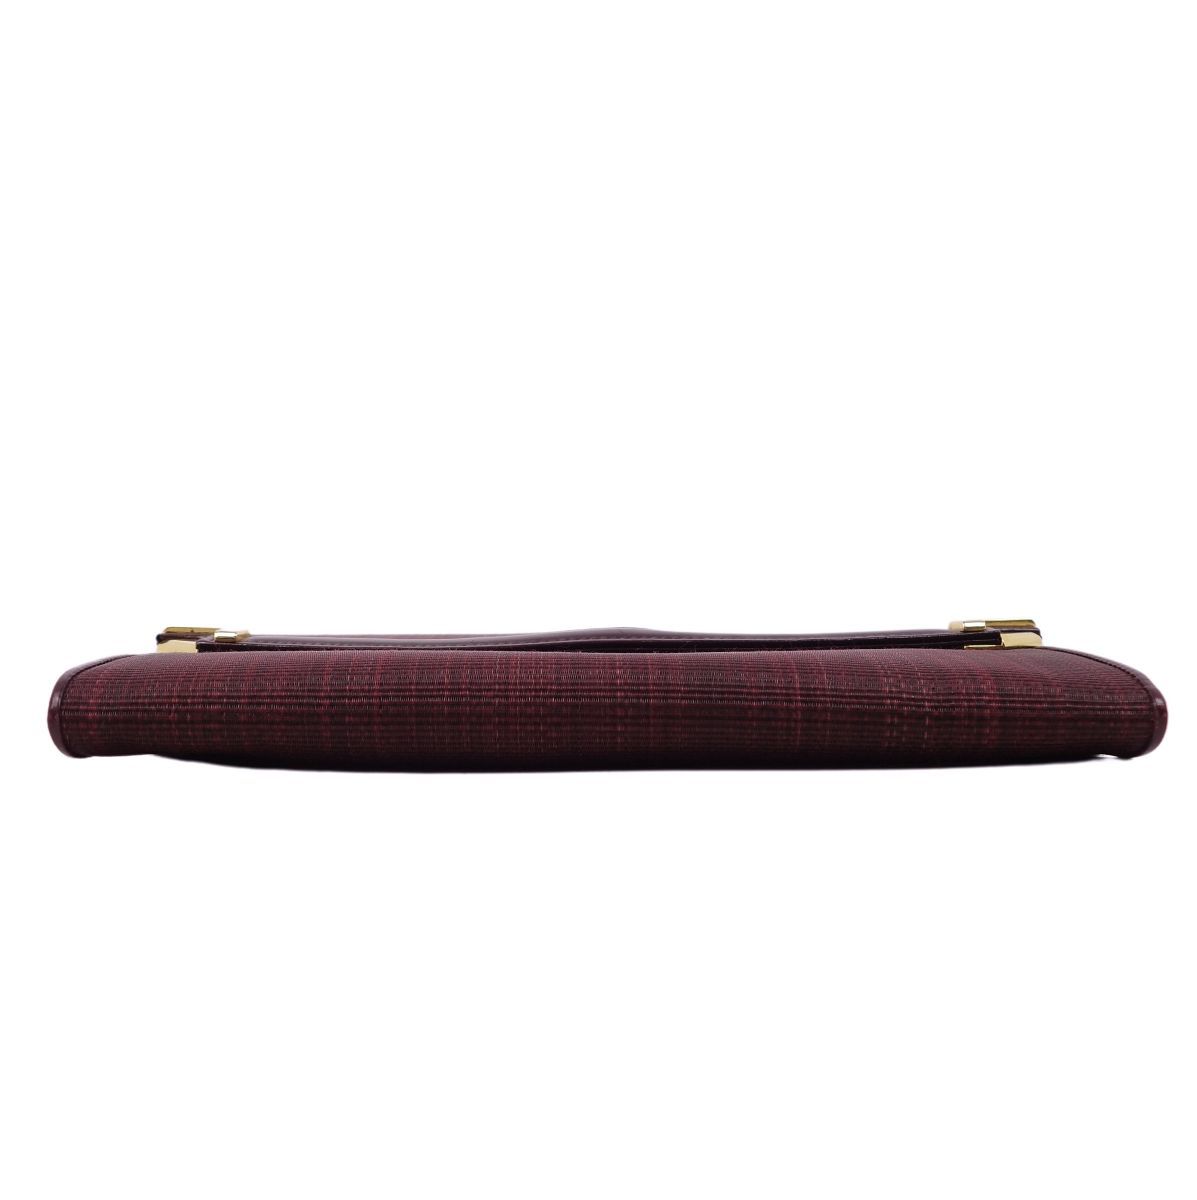  beautiful goods Conte sCOMTESSE bag clutch bag second bag hose hair - horse wool lady's Germany made bordeaux ch09os-rm04e21102